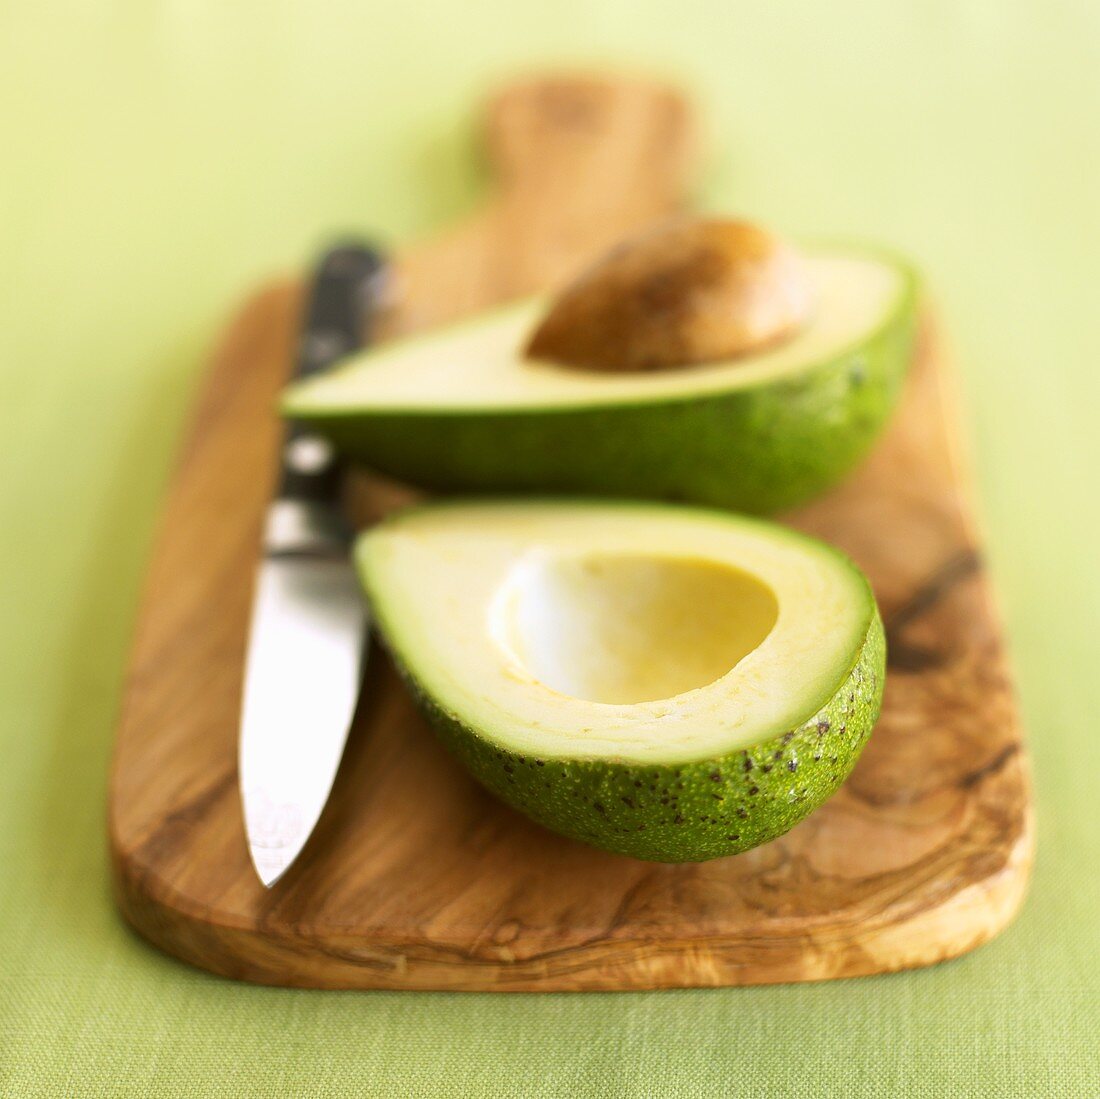 A halved avocado with knife on a wooden board